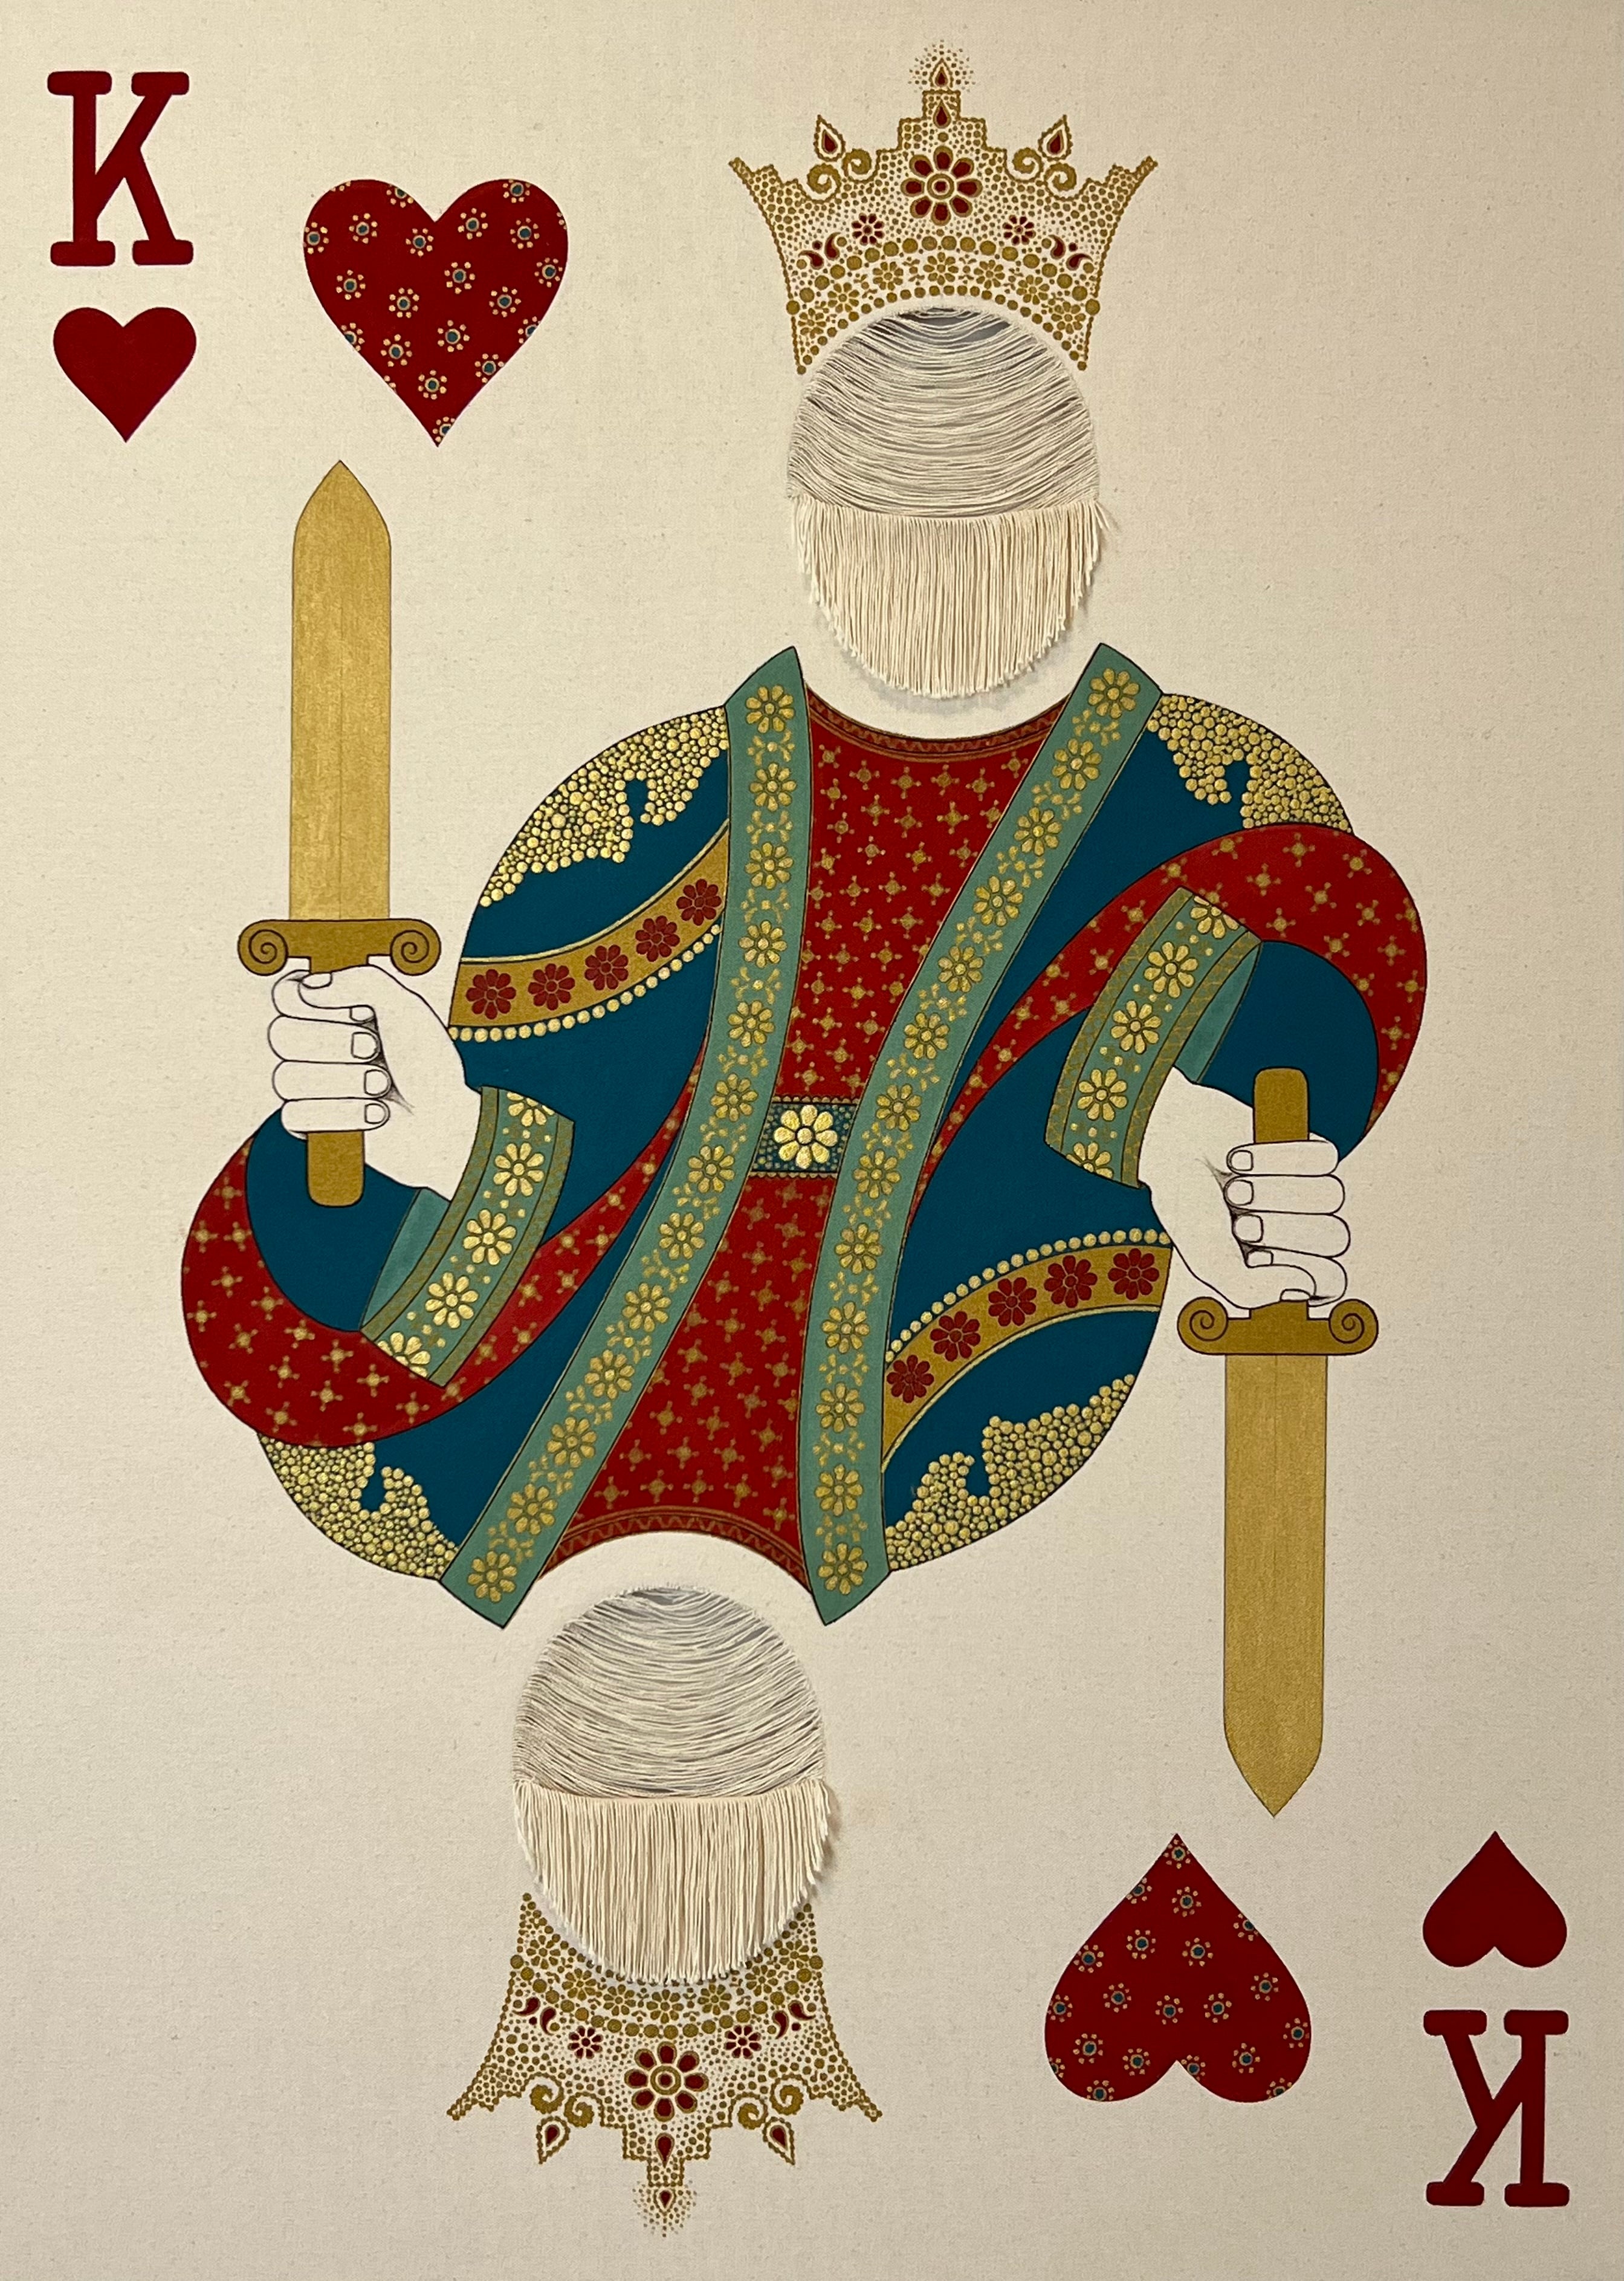 'KING OF HEARTS' - Acrylic on Canvas